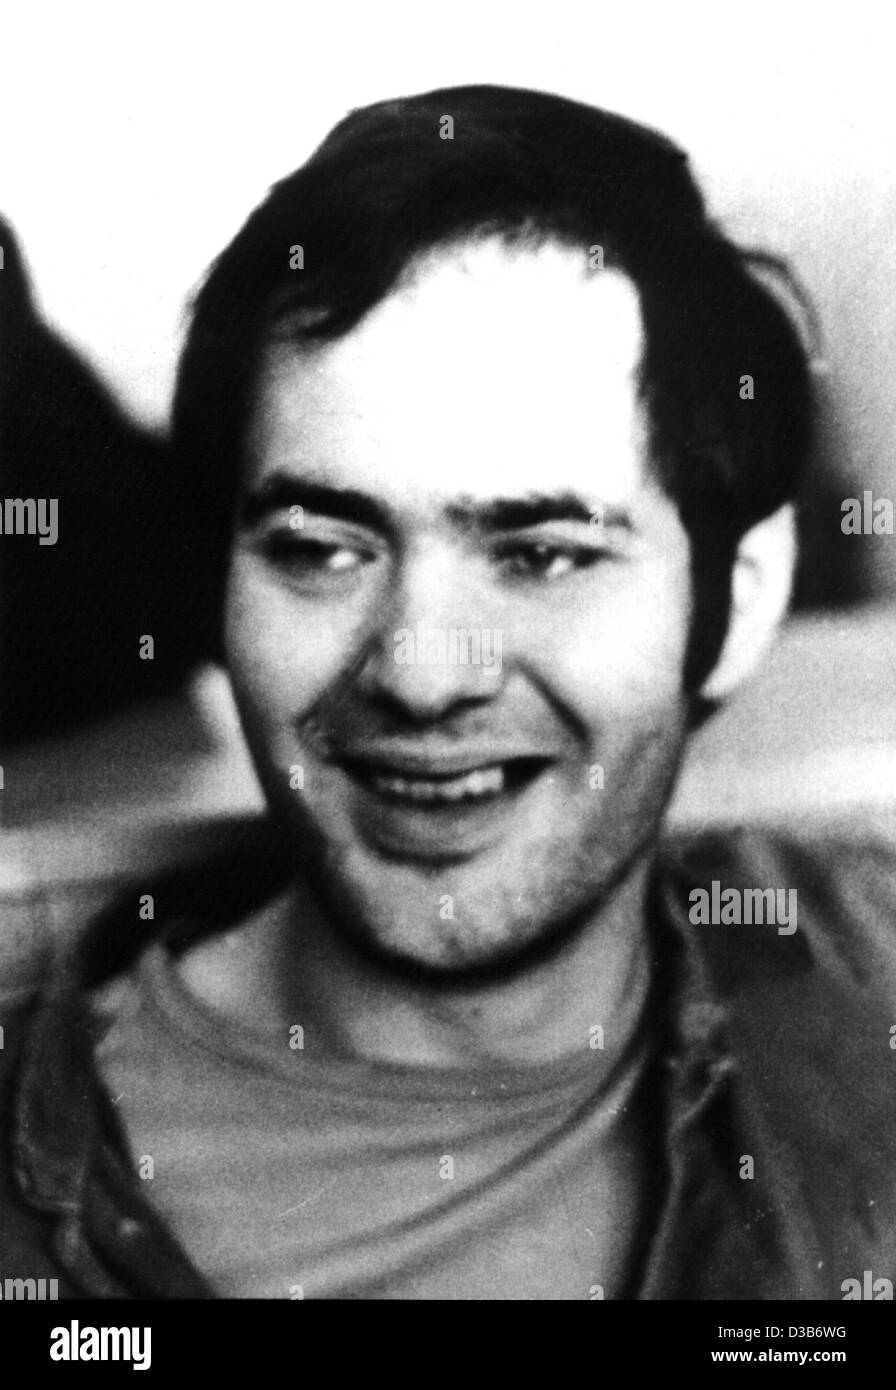 (dpa files) - An undated file picture shows Andreas Baader, a terrorist of the first generation of the German terrorist group RAF (Rote Armee Fraktion/Red Army Fraction). He was convicted of the 1968 arson bombing of a Frankfurt department store. With the help of famous journalist Ulrike Meinhof he  Stock Photo